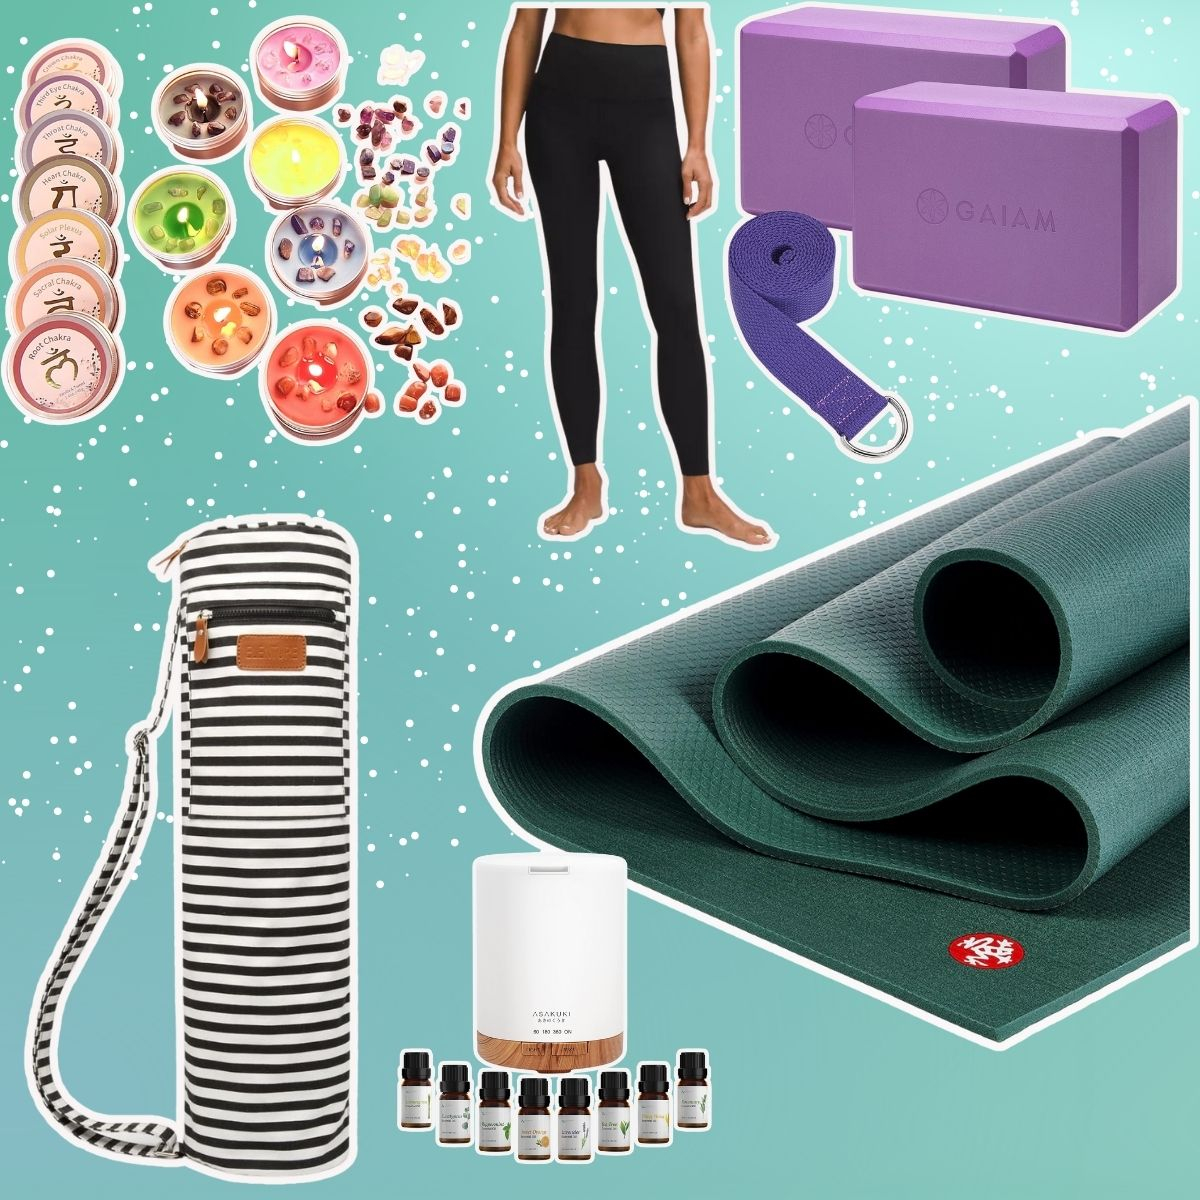 Yoga Kit Essentials, Novelty Gifts